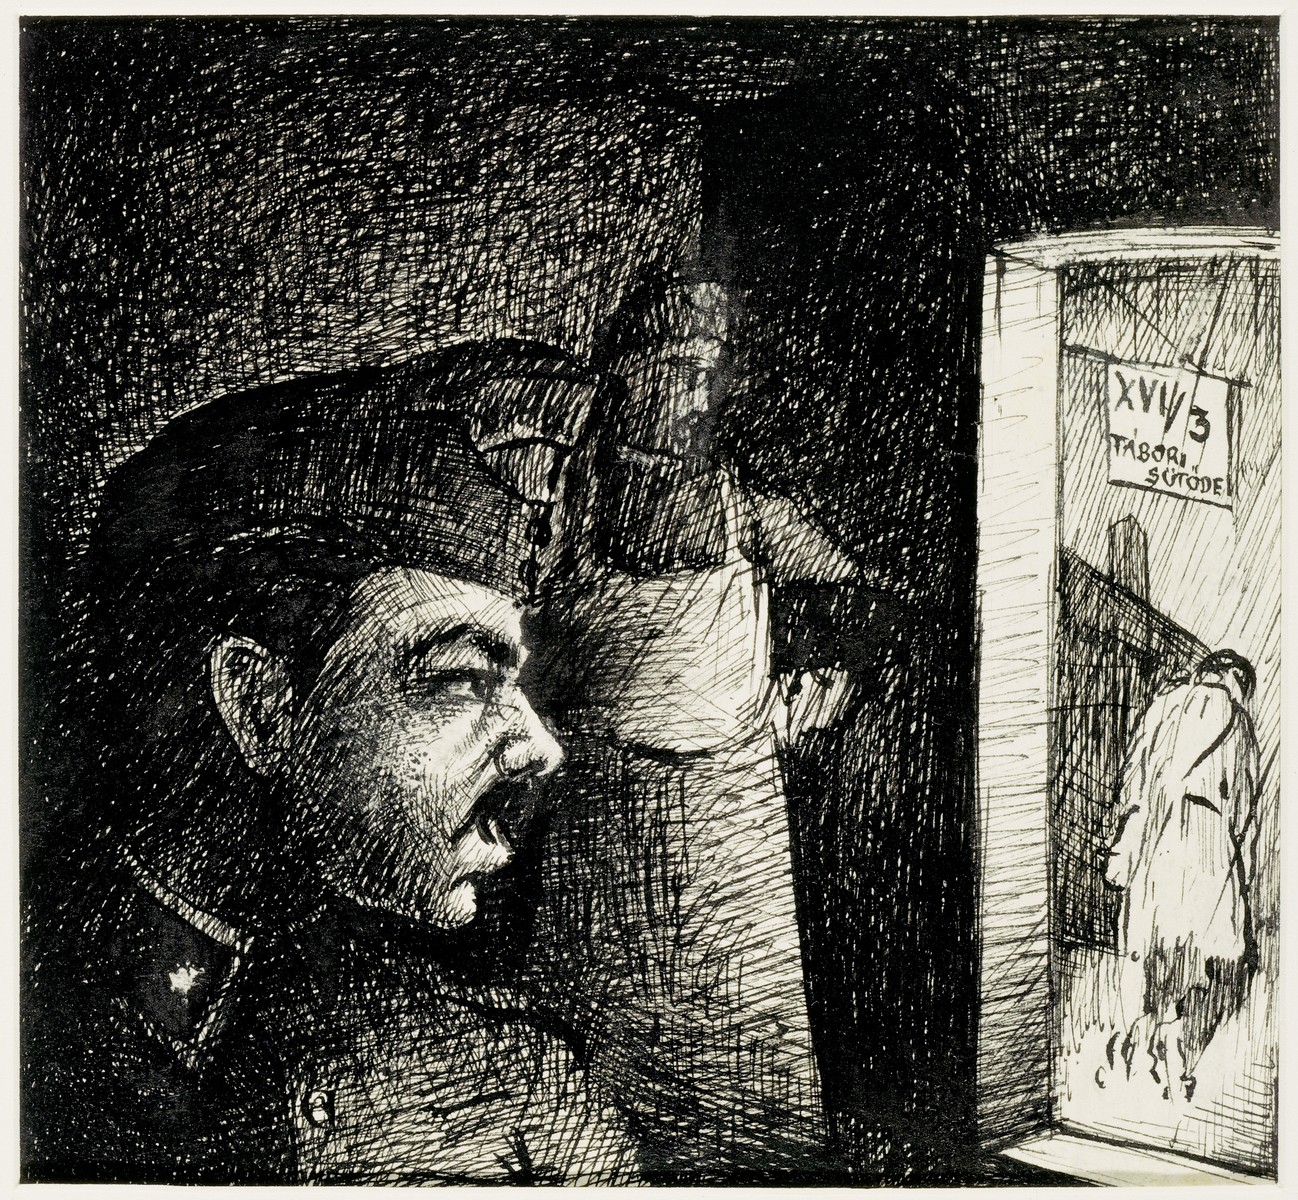 Holocaust art by Ervin Abadi. Ink drawing.

Ervin Abadi, a Hungarian Jew from Budapest, was an aspiring young artist when WWII began.  He was drafted into the Hungarian labor service in the early 1940s.  Abadi managed to escape, but  was recaptured and immediately deported to Bergen-Belsen.  When the camp was liberated, his condition was such that he required extended hospitalization.  During his convalescence, he created dozens of works of holocaust art, including ink drawings, pencil and ink sketches and  watercolors.
After recuperating Abadi returned to Budapest, where he published a collection of his watercolors in 1946.  After becoming disillusioned with the communist regime in Hungary, he moved to Israel, where he continued to publish in Hungarian and Hebrew.  He died in Israel in 1980.